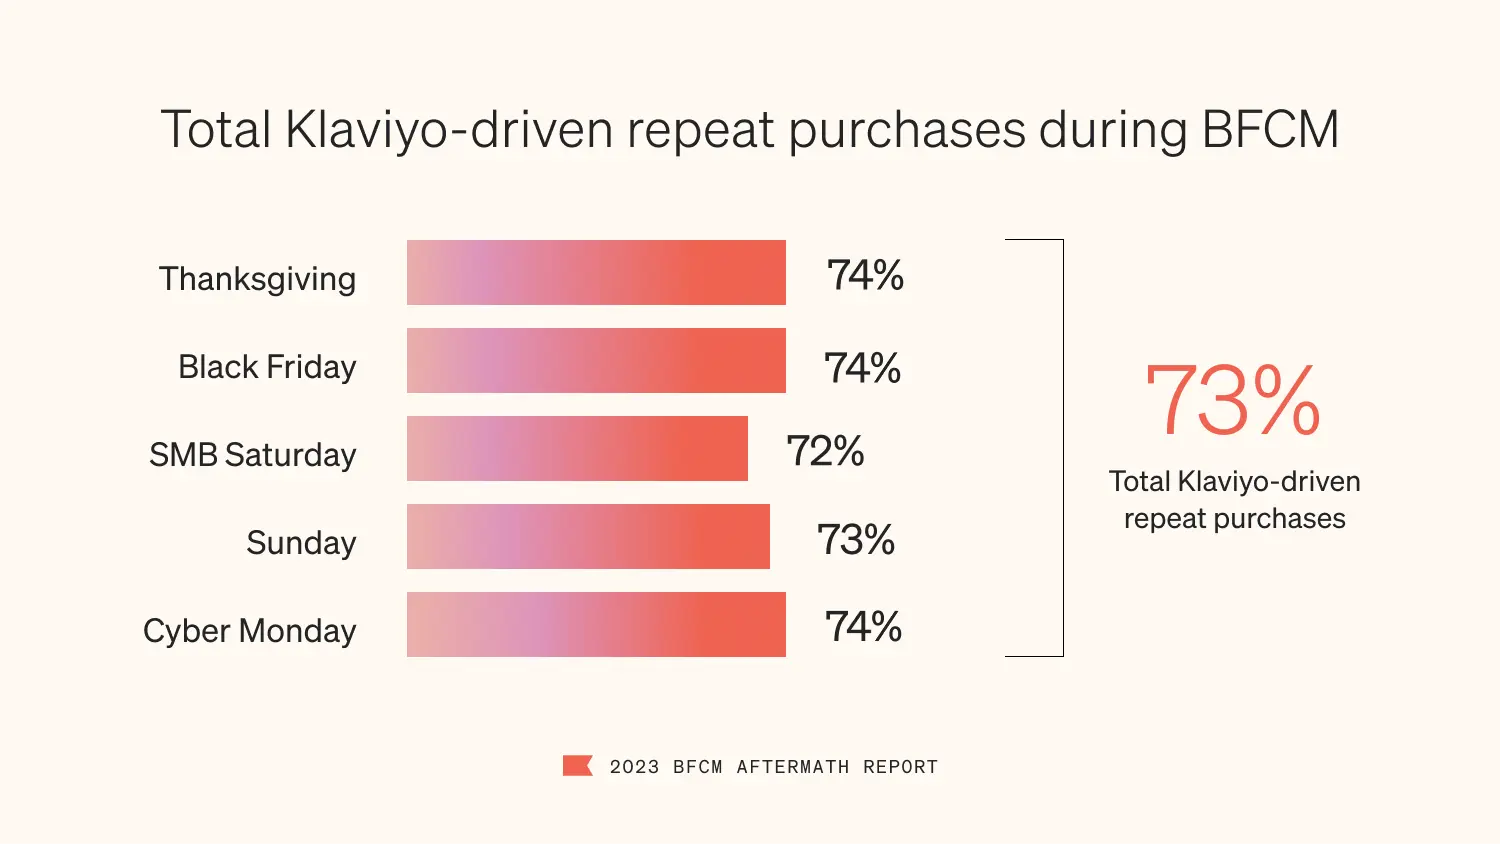 In a color scheme of black font and poppy bars on a cotton background, image visualizes repeat purchase data from BFCM for Klaviyo customers. 73% of Klaviyo-powered purchases—purchases attributable to email, SMS, or mobile push messages—were made by repeat purchasers, with the most repeat purchases occurring on Thanksgiving, Black Friday, and Cyber Monday (all 74%).